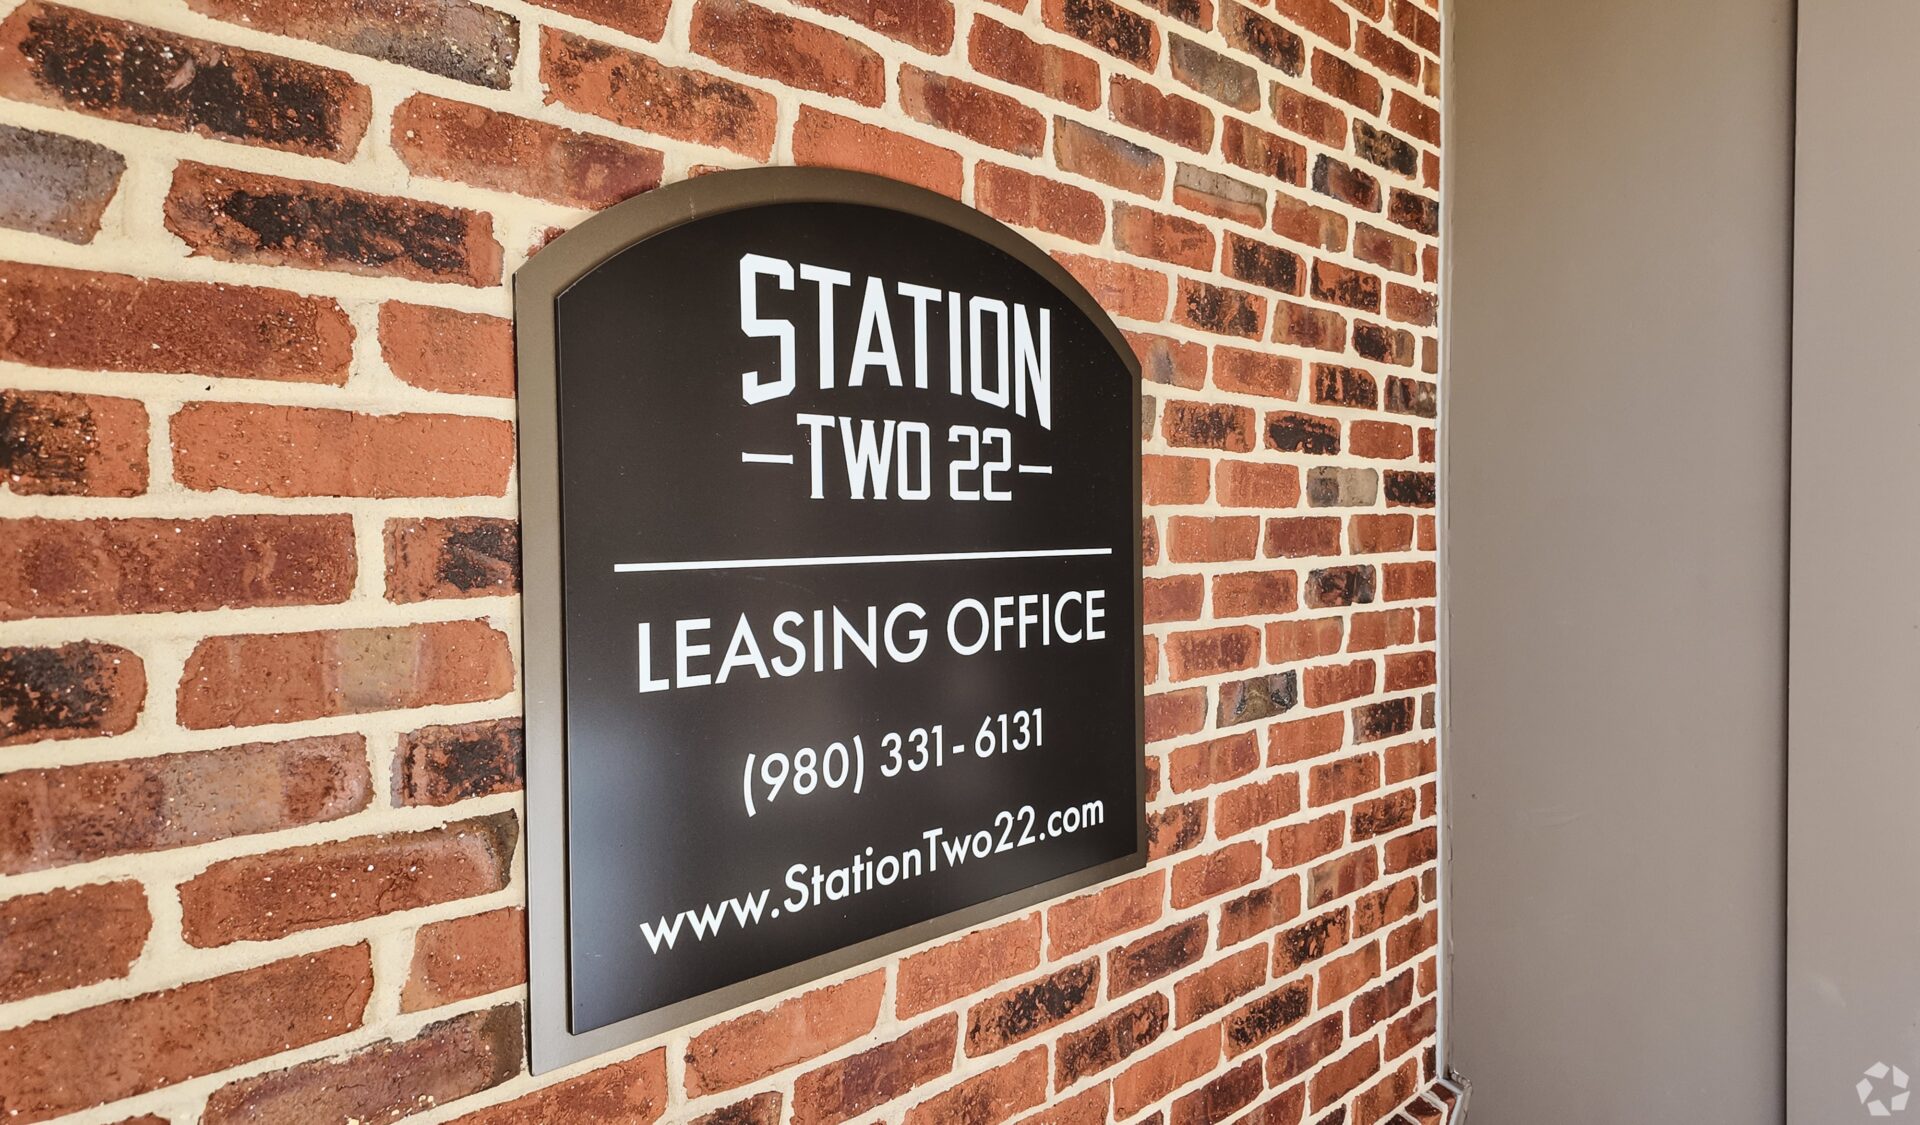 Station Two22